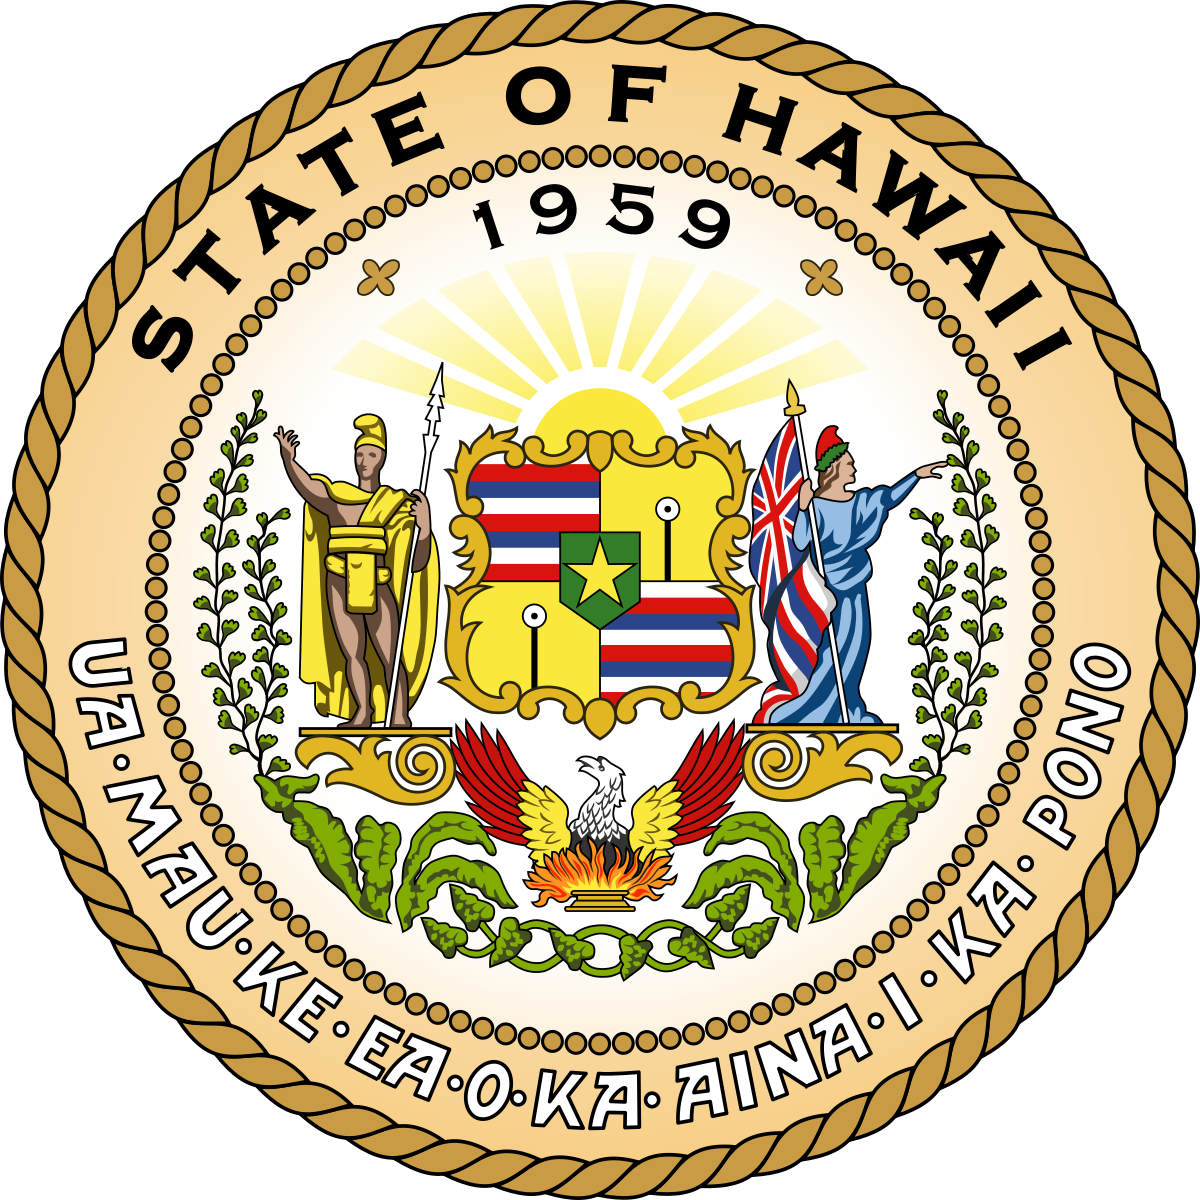 Hawaii's New Money Transmitters Act Will Require Virtual Currency Licenses